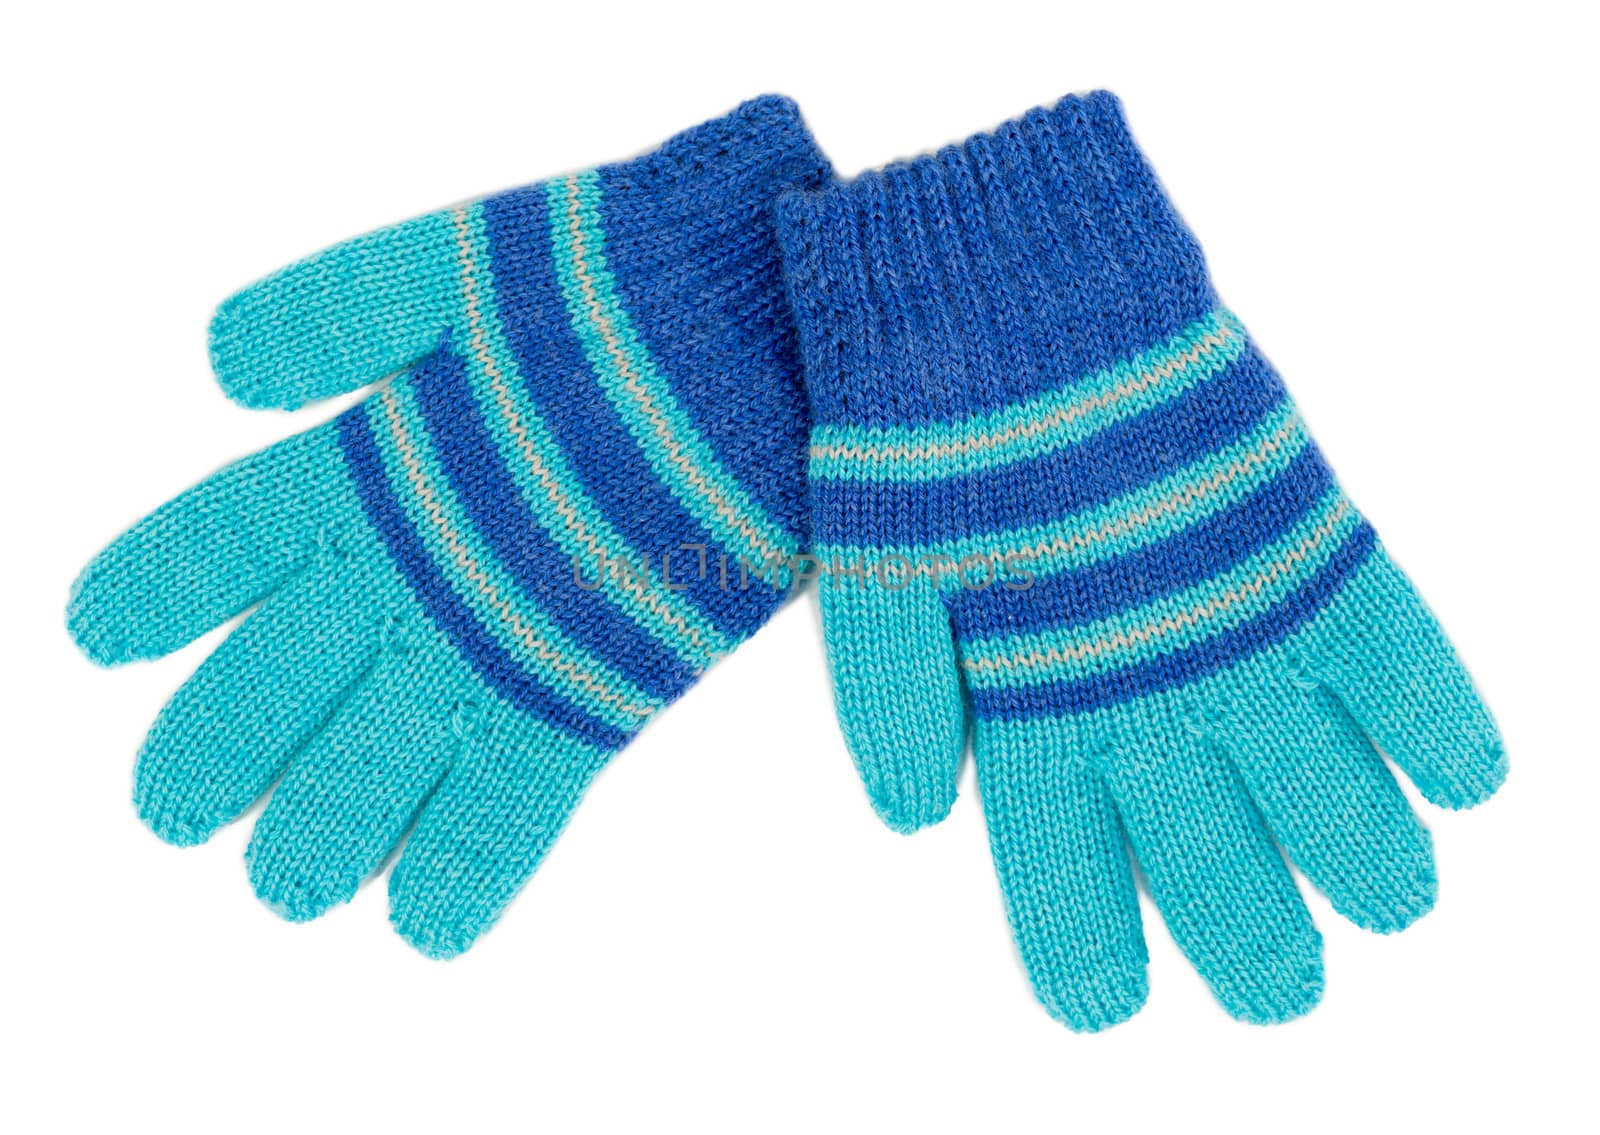 pair of blue striped knitted Gloves by RuslanOmega